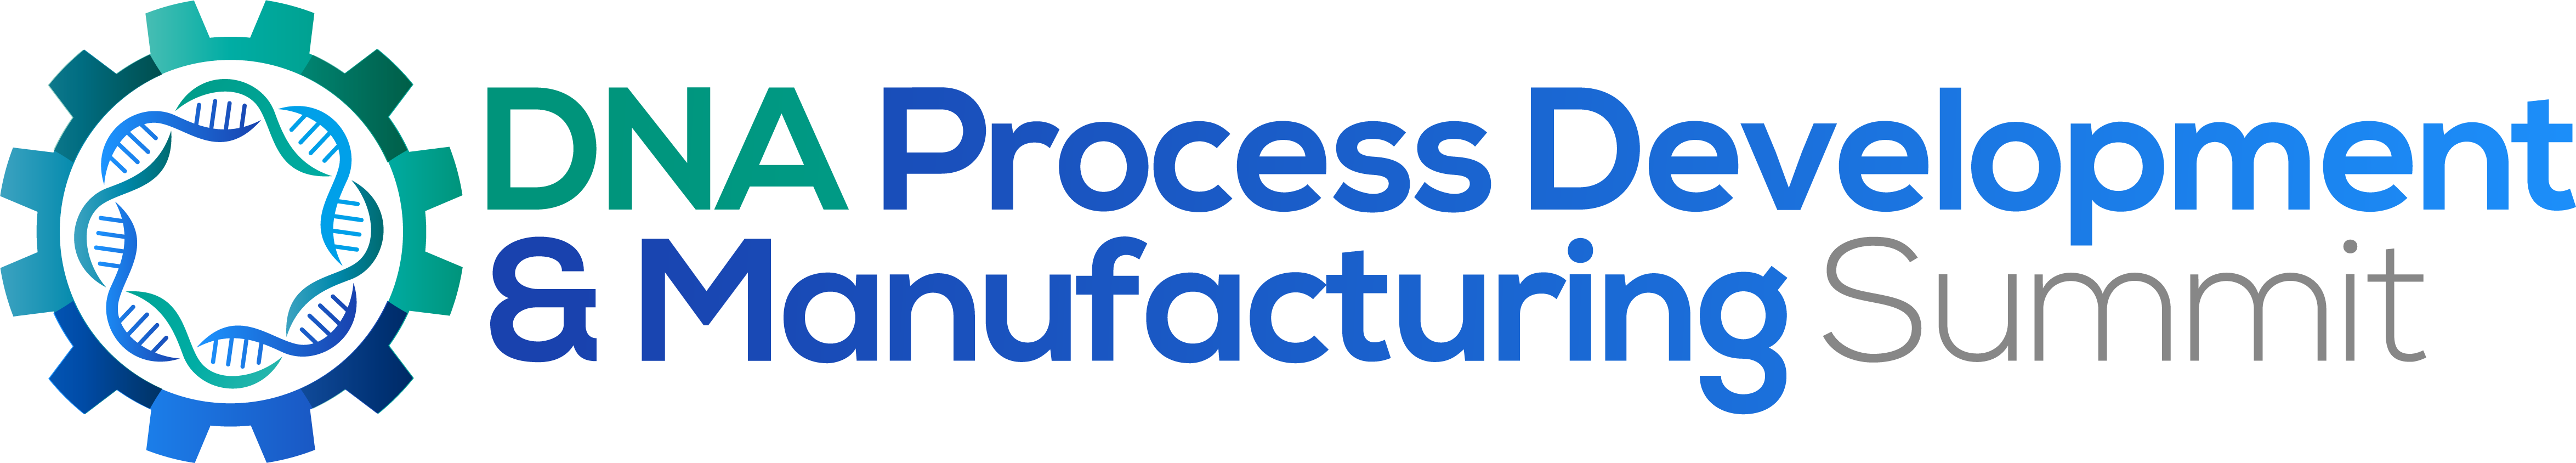 DNA Process Development and Manufacturing Summit logo